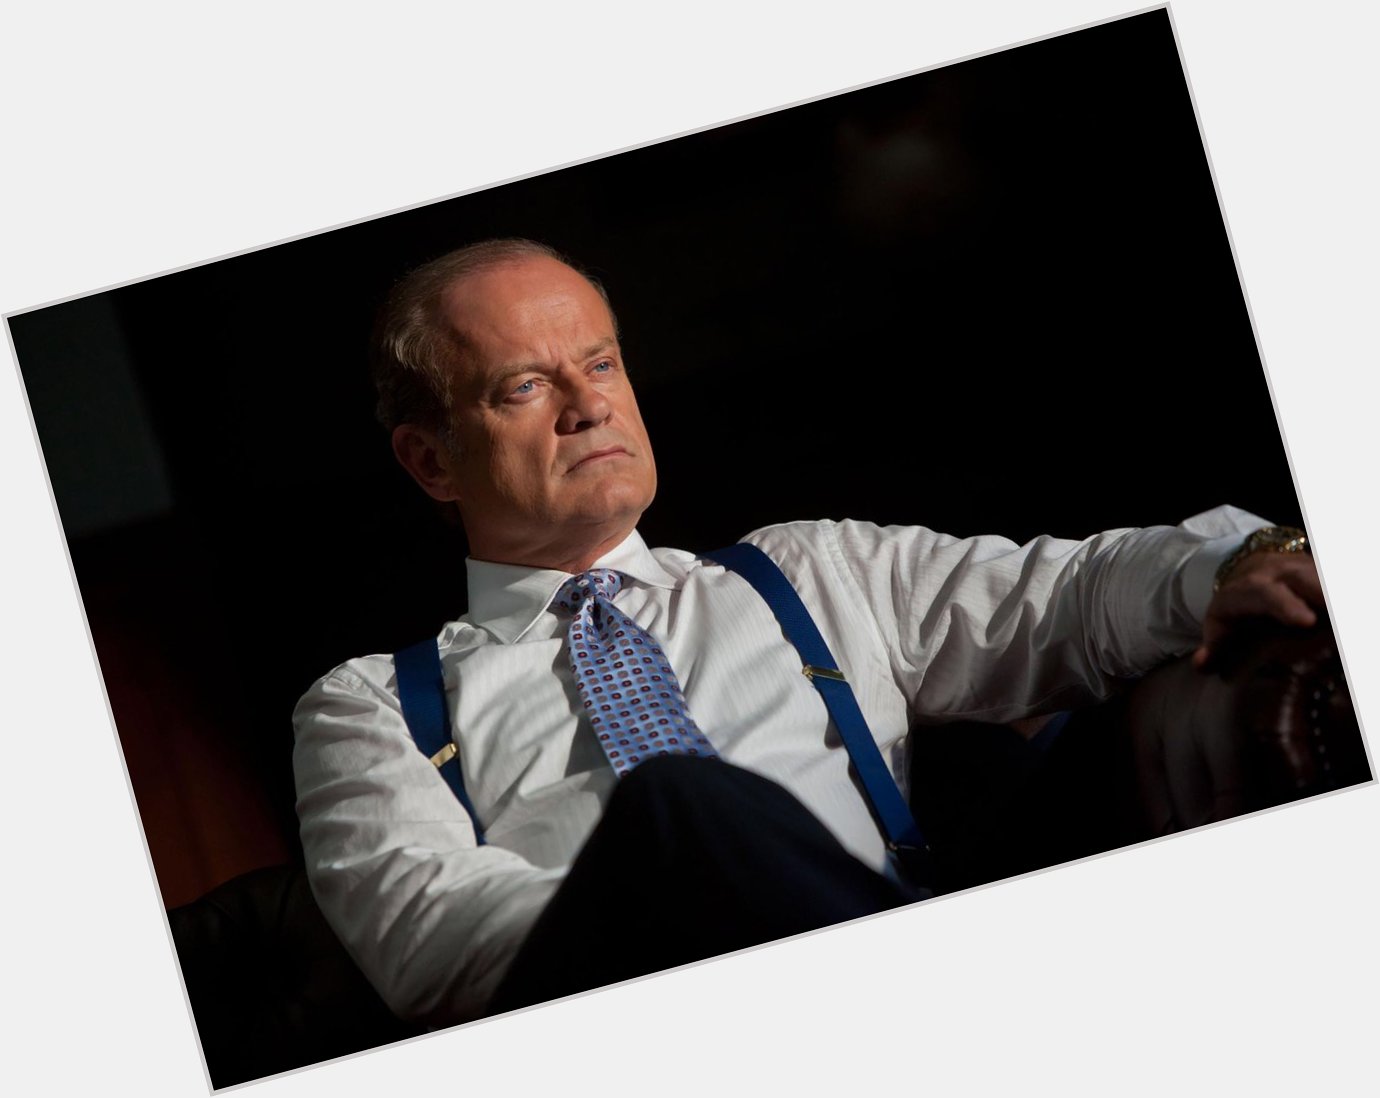 Happy Birthday to Kelsey Grammer, who turns 60 today! 